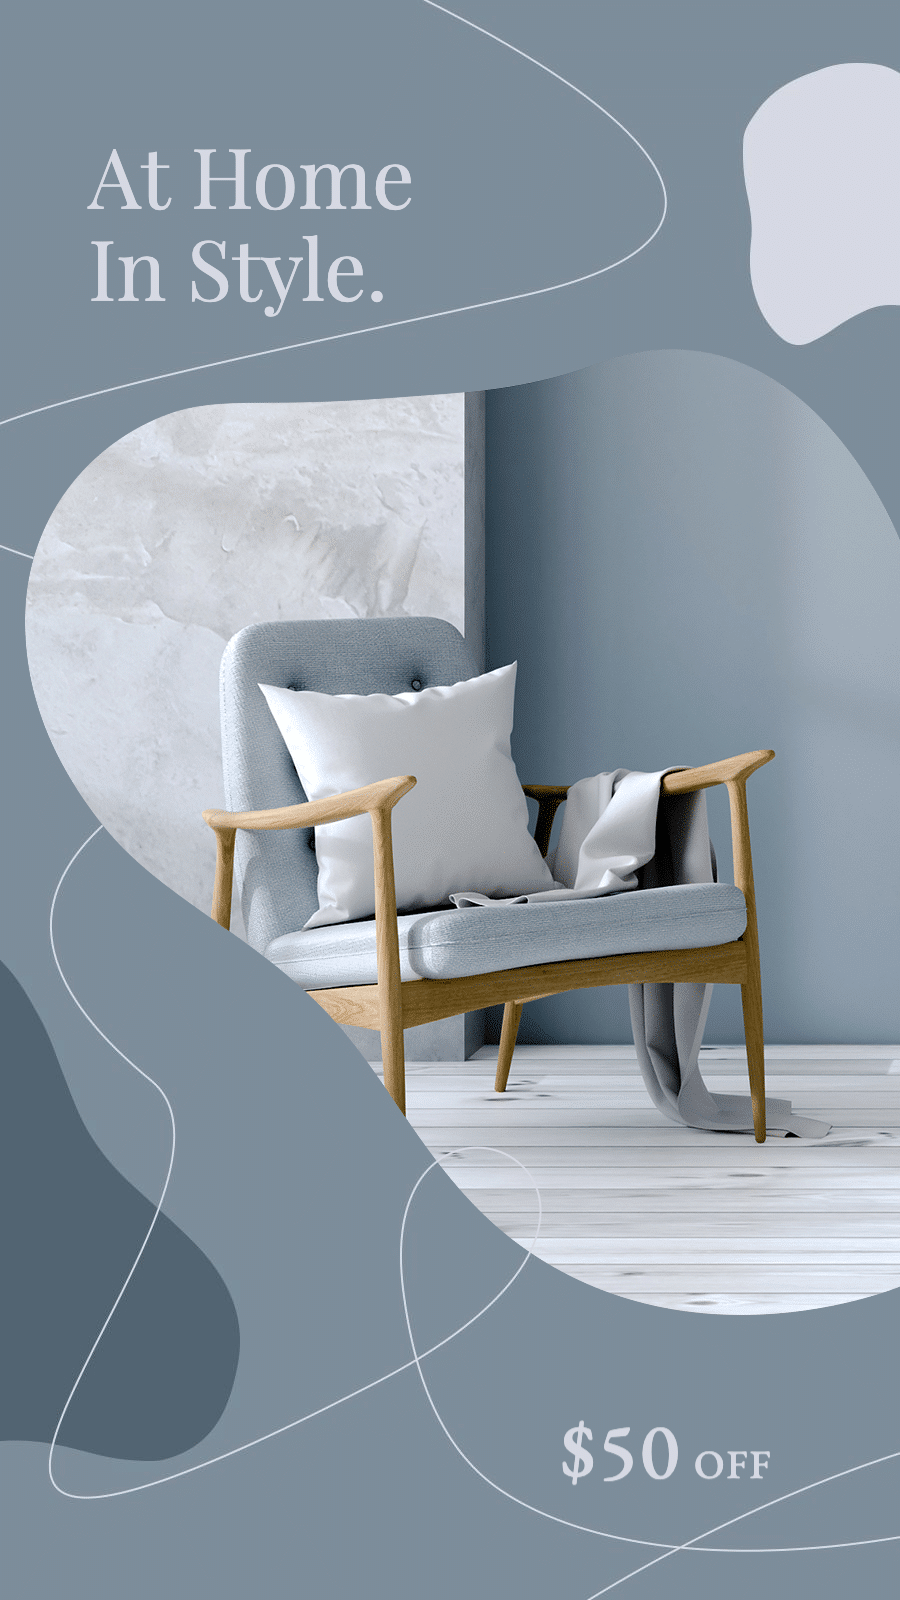 Blue and Grey Lines Minimal Geometry Design Home Armchair Furniture Product Promo Ecommerce Story 预览效果